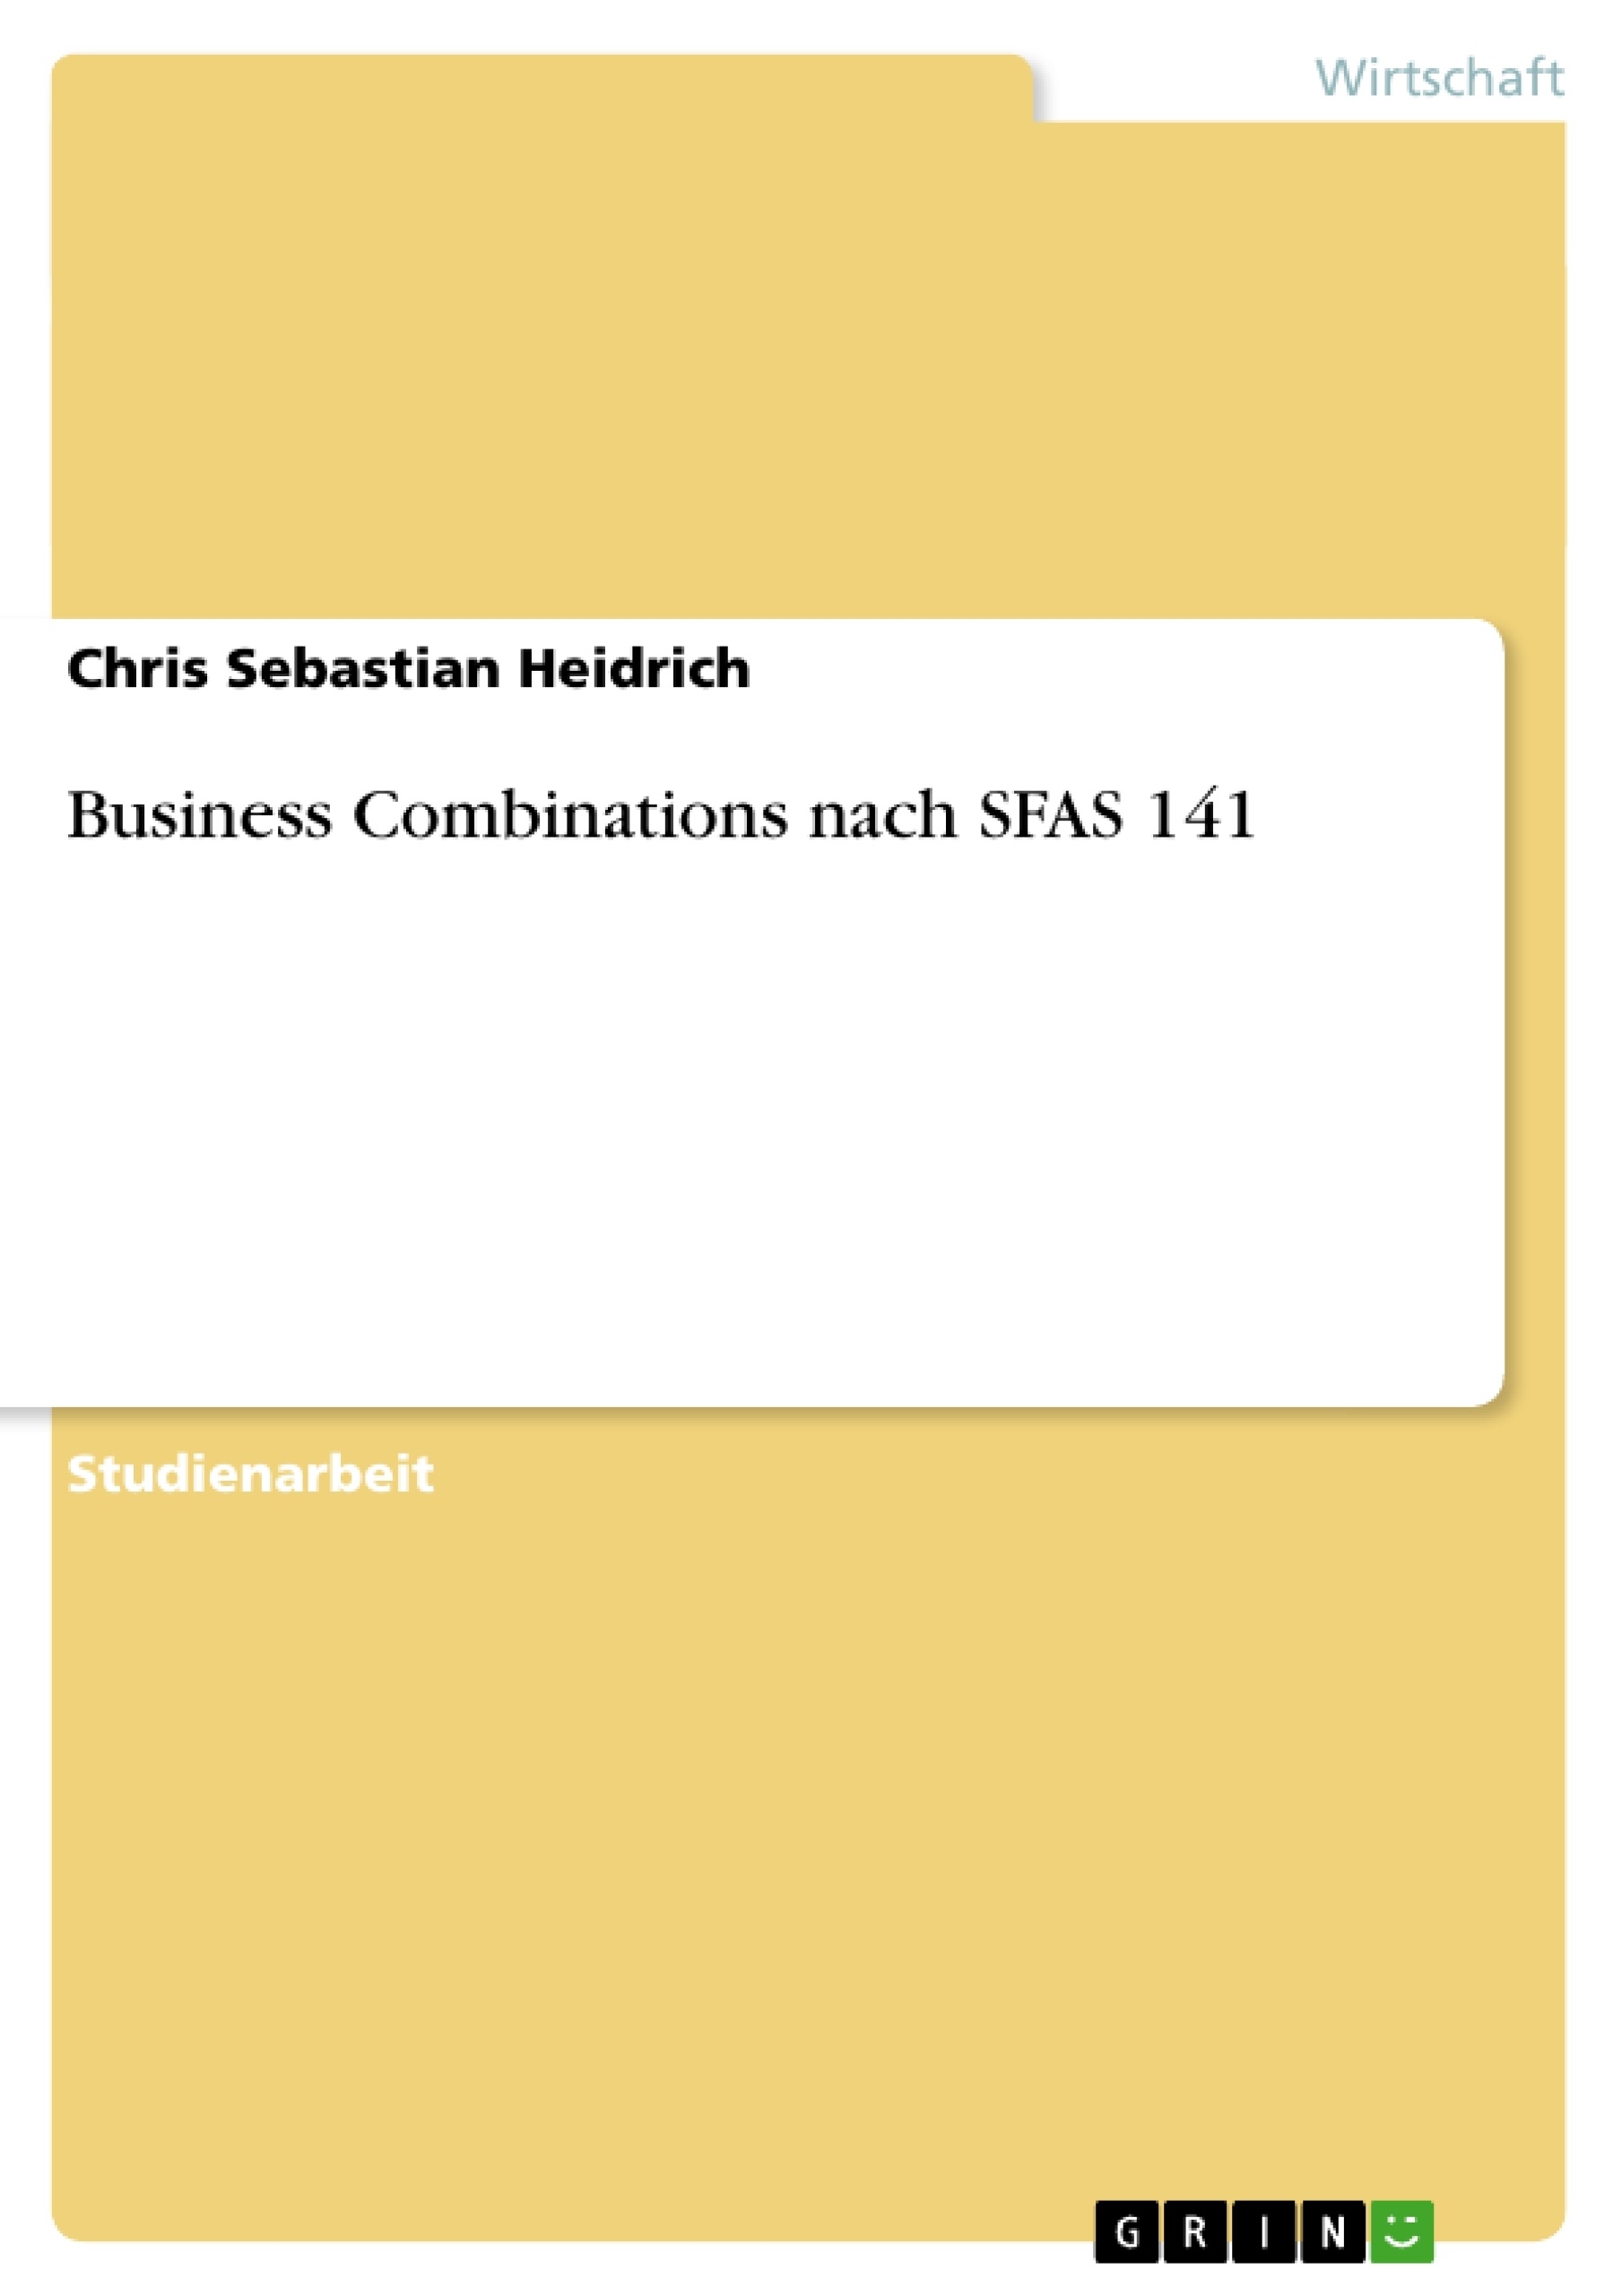 Título: Business Combinations nach SFAS 141